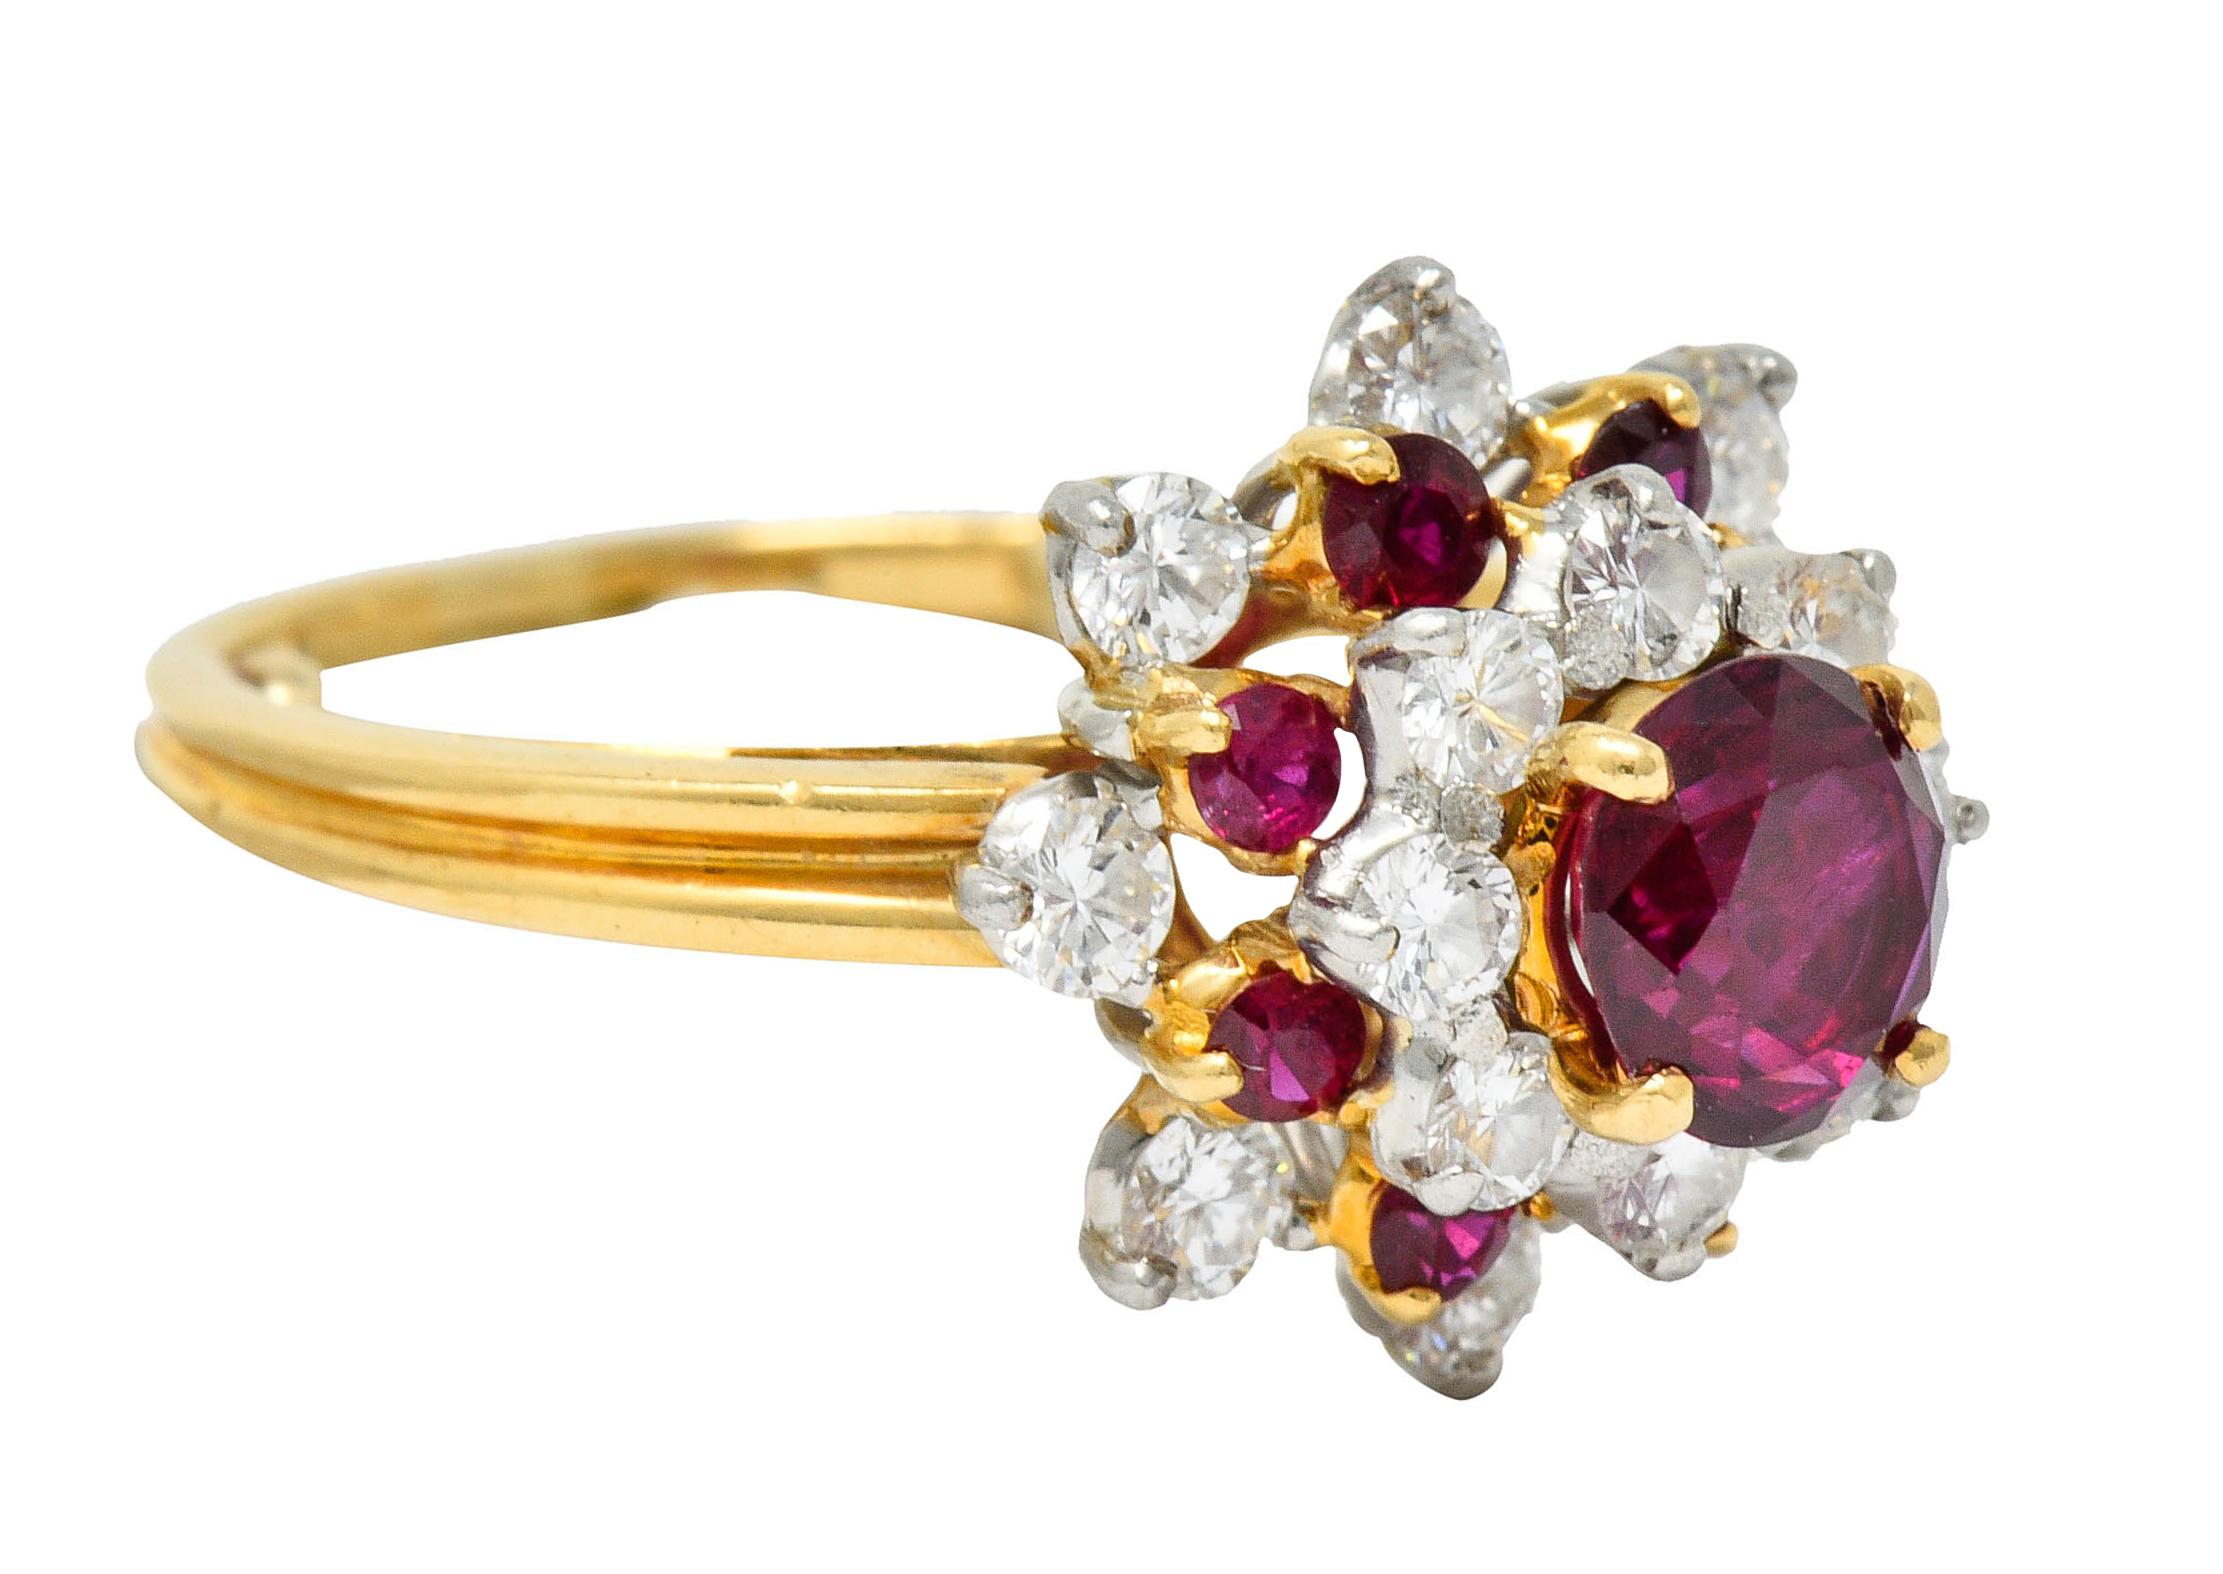 Cluster style ring with platinum and gold tiers of prong set rubies and diamonds

Centering a round cut Thai ruby with vibrant red color and weighs approximately 1.00 carat

Surrounded by round brilliant cut diamonds weighing in total approximately